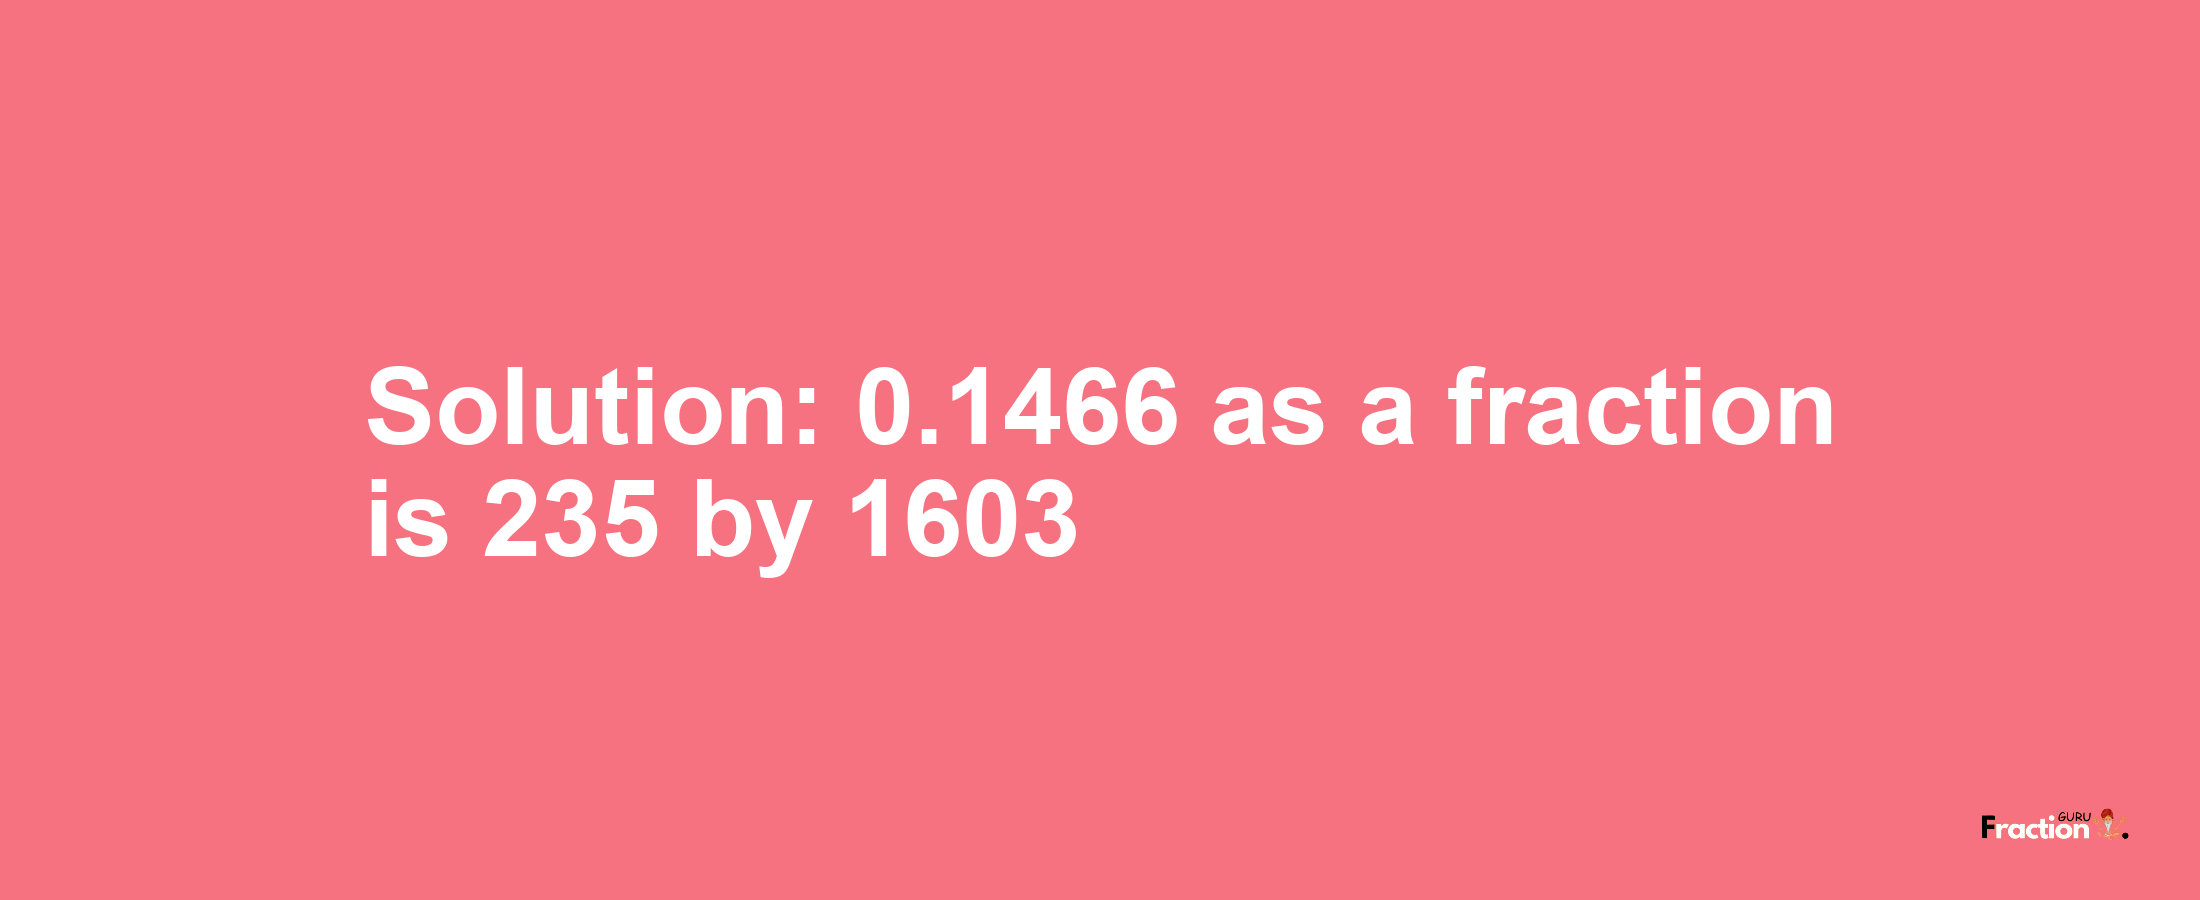 Solution:0.1466 as a fraction is 235/1603